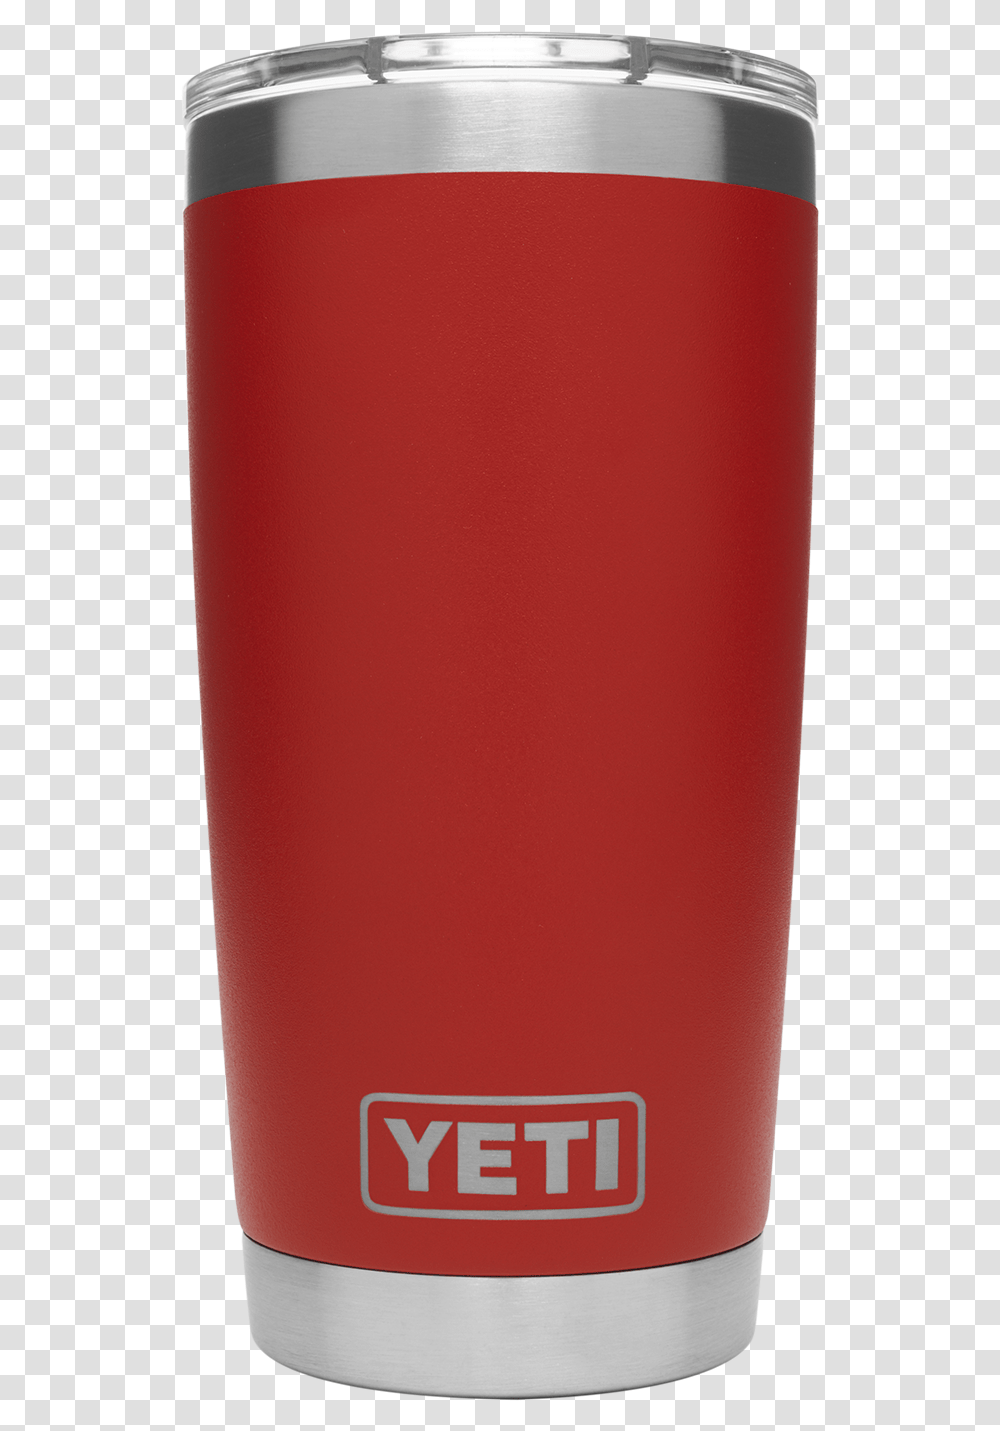 Yeti 20 Oz Red, Appliance, Beer, Alcohol, Beverage Transparent Png